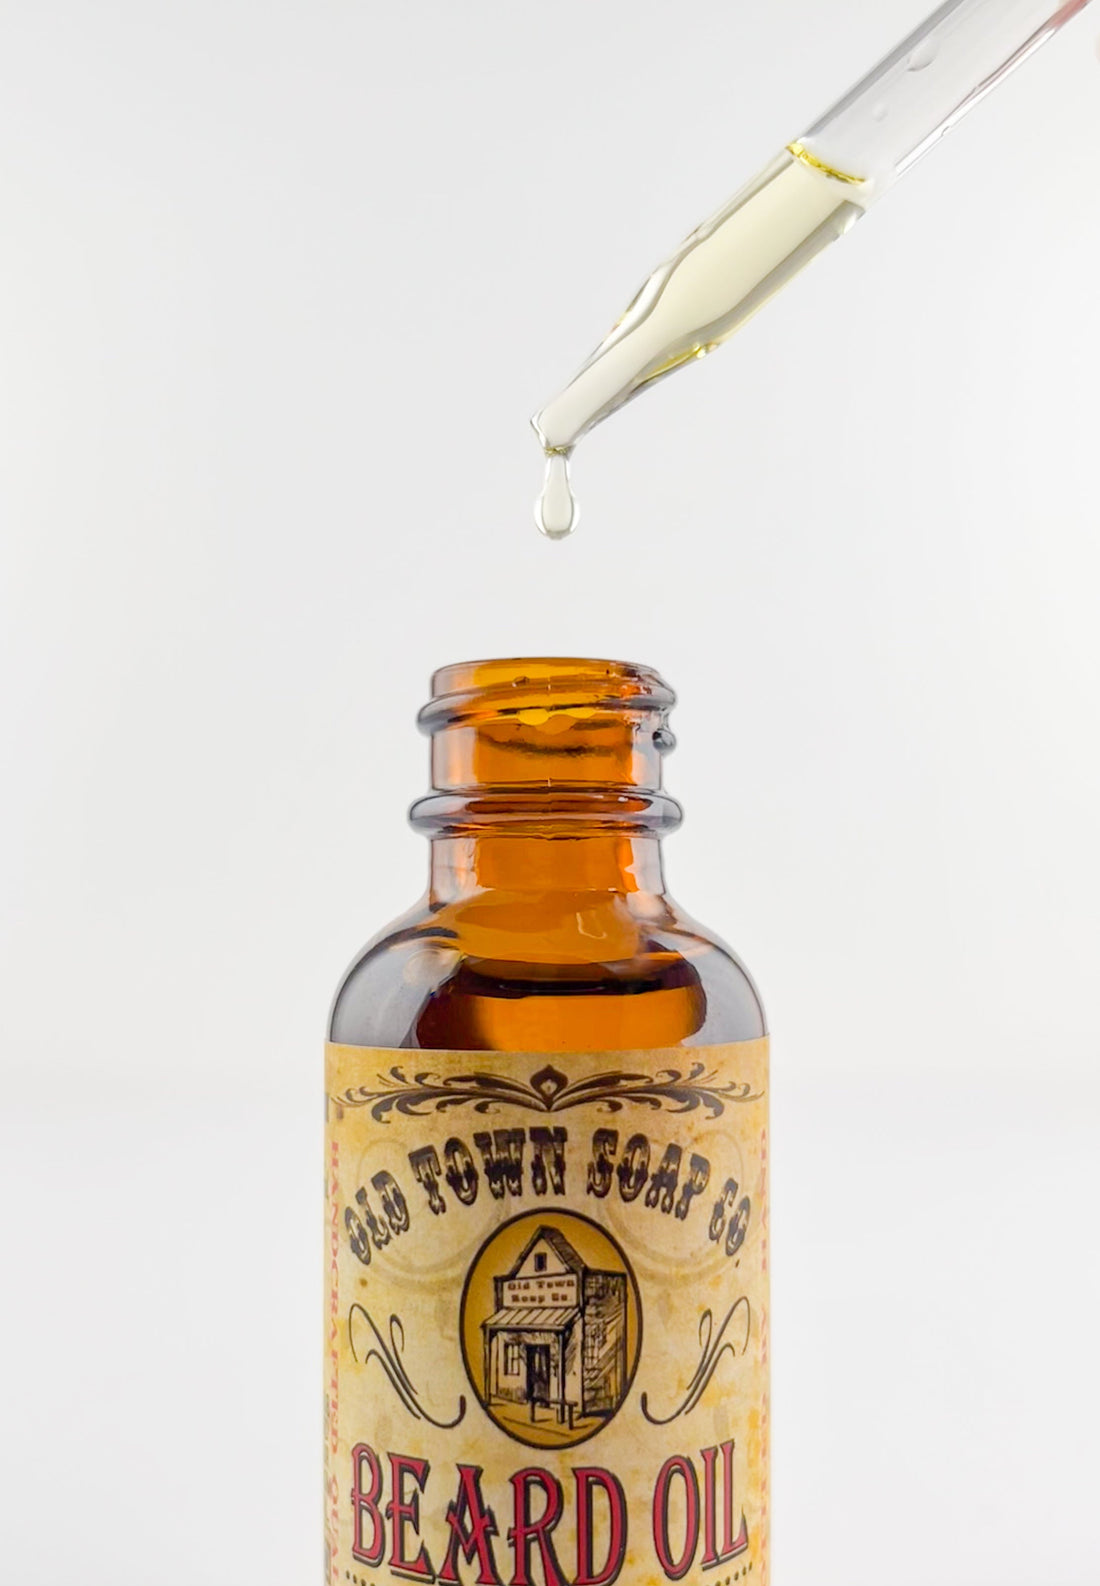 The Sea Pirate Beard Oil - Old Town Soap Co.